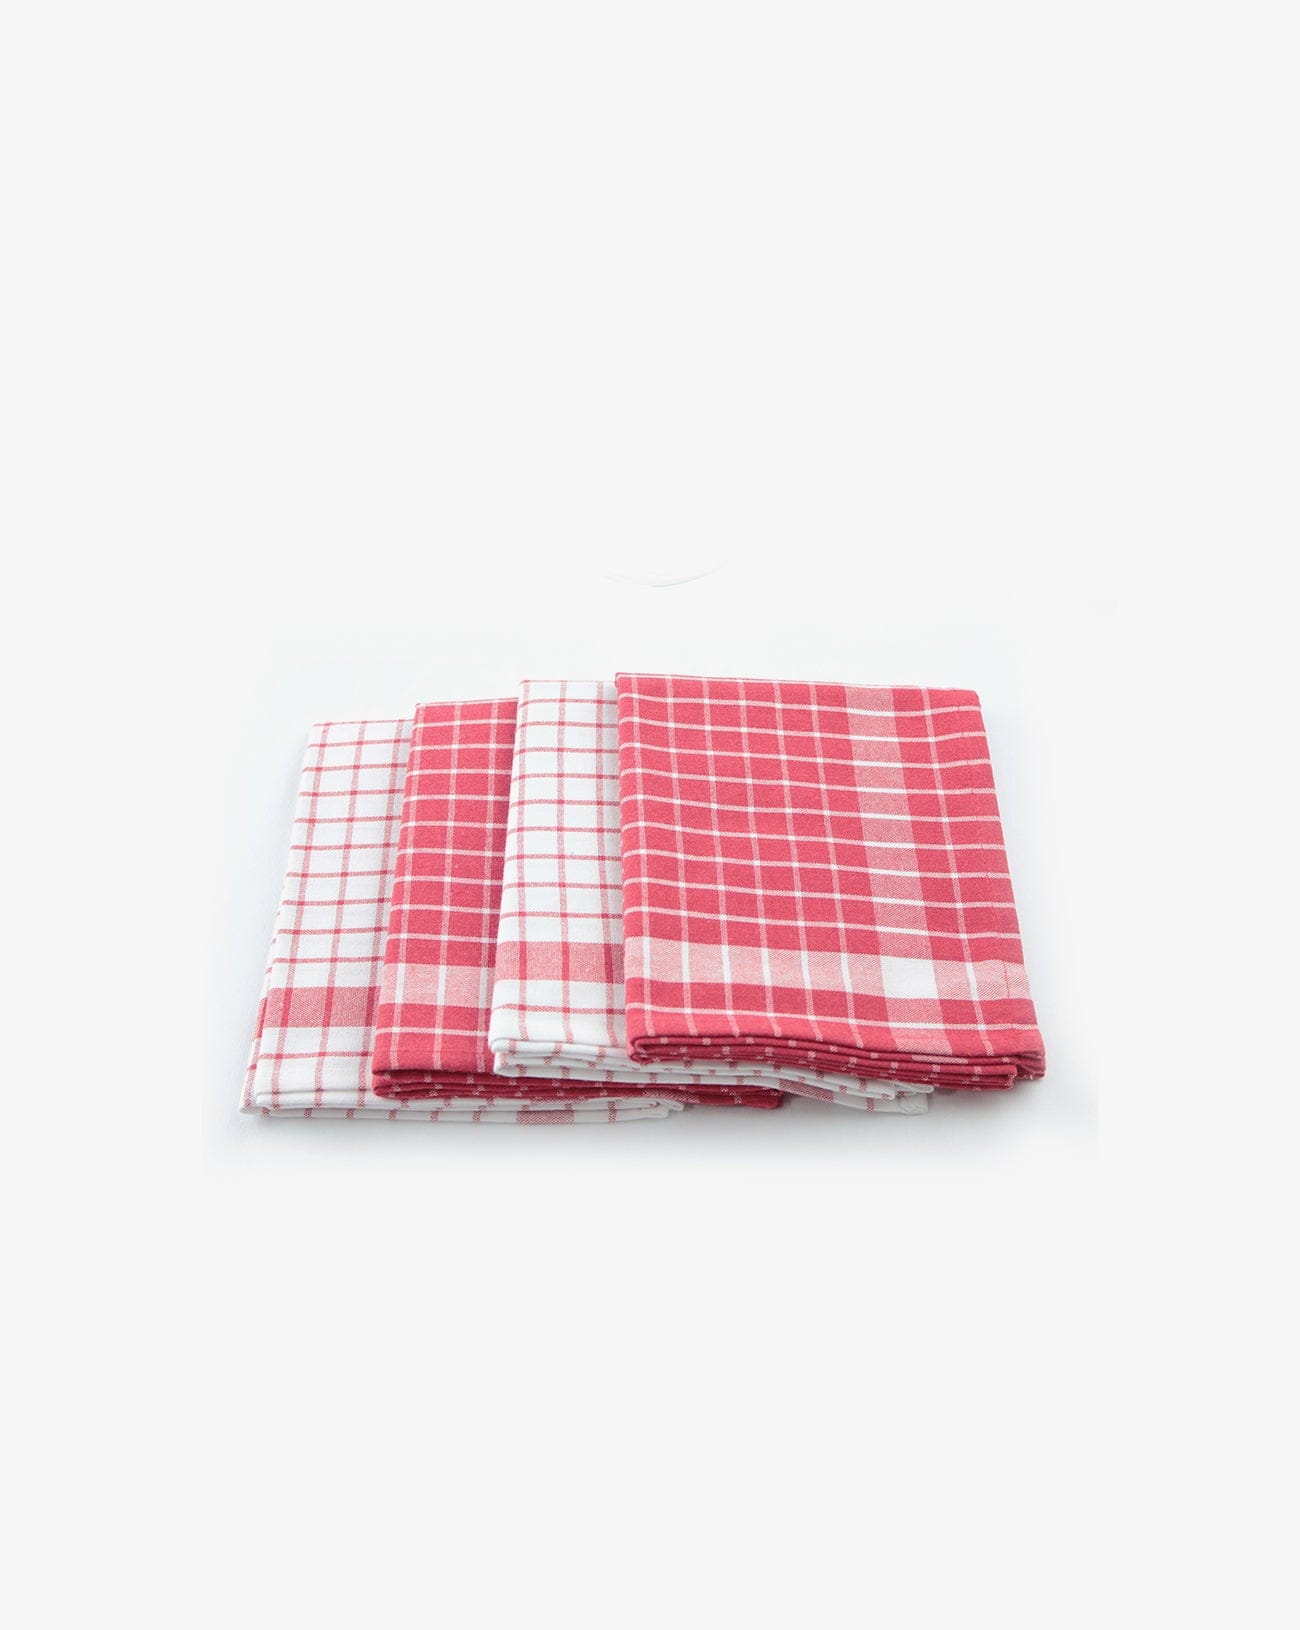 SARO 1029.R2028 20 x 28 in. Gingham Plaid Check Design Cotton Kitchen Towel  Red - Set of 4, 1 - Jay C Food Stores